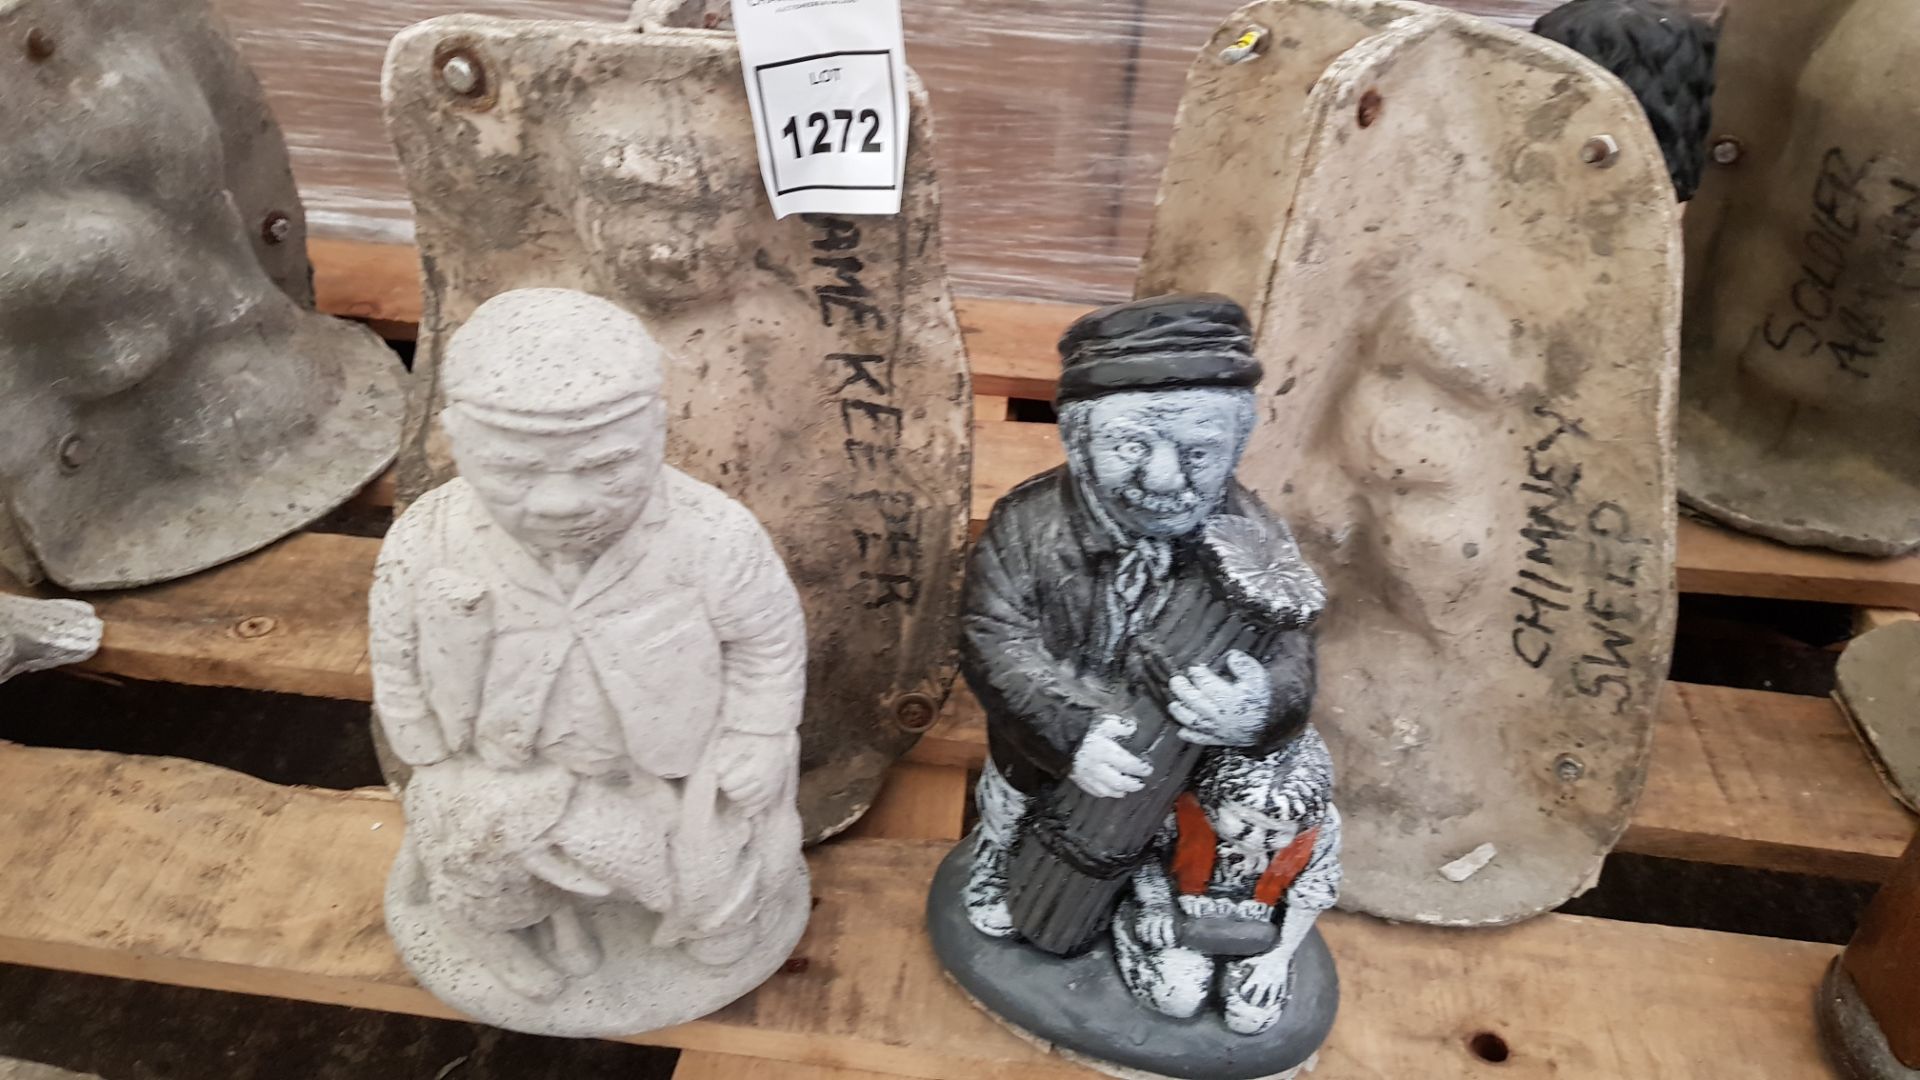 2 X GARDEN ORNAMENTS I.E GAME KEEPER AND CHIMNEY SWEEPER WITH FIBRE GLASS MOULDS AND LATEX SLIPS (